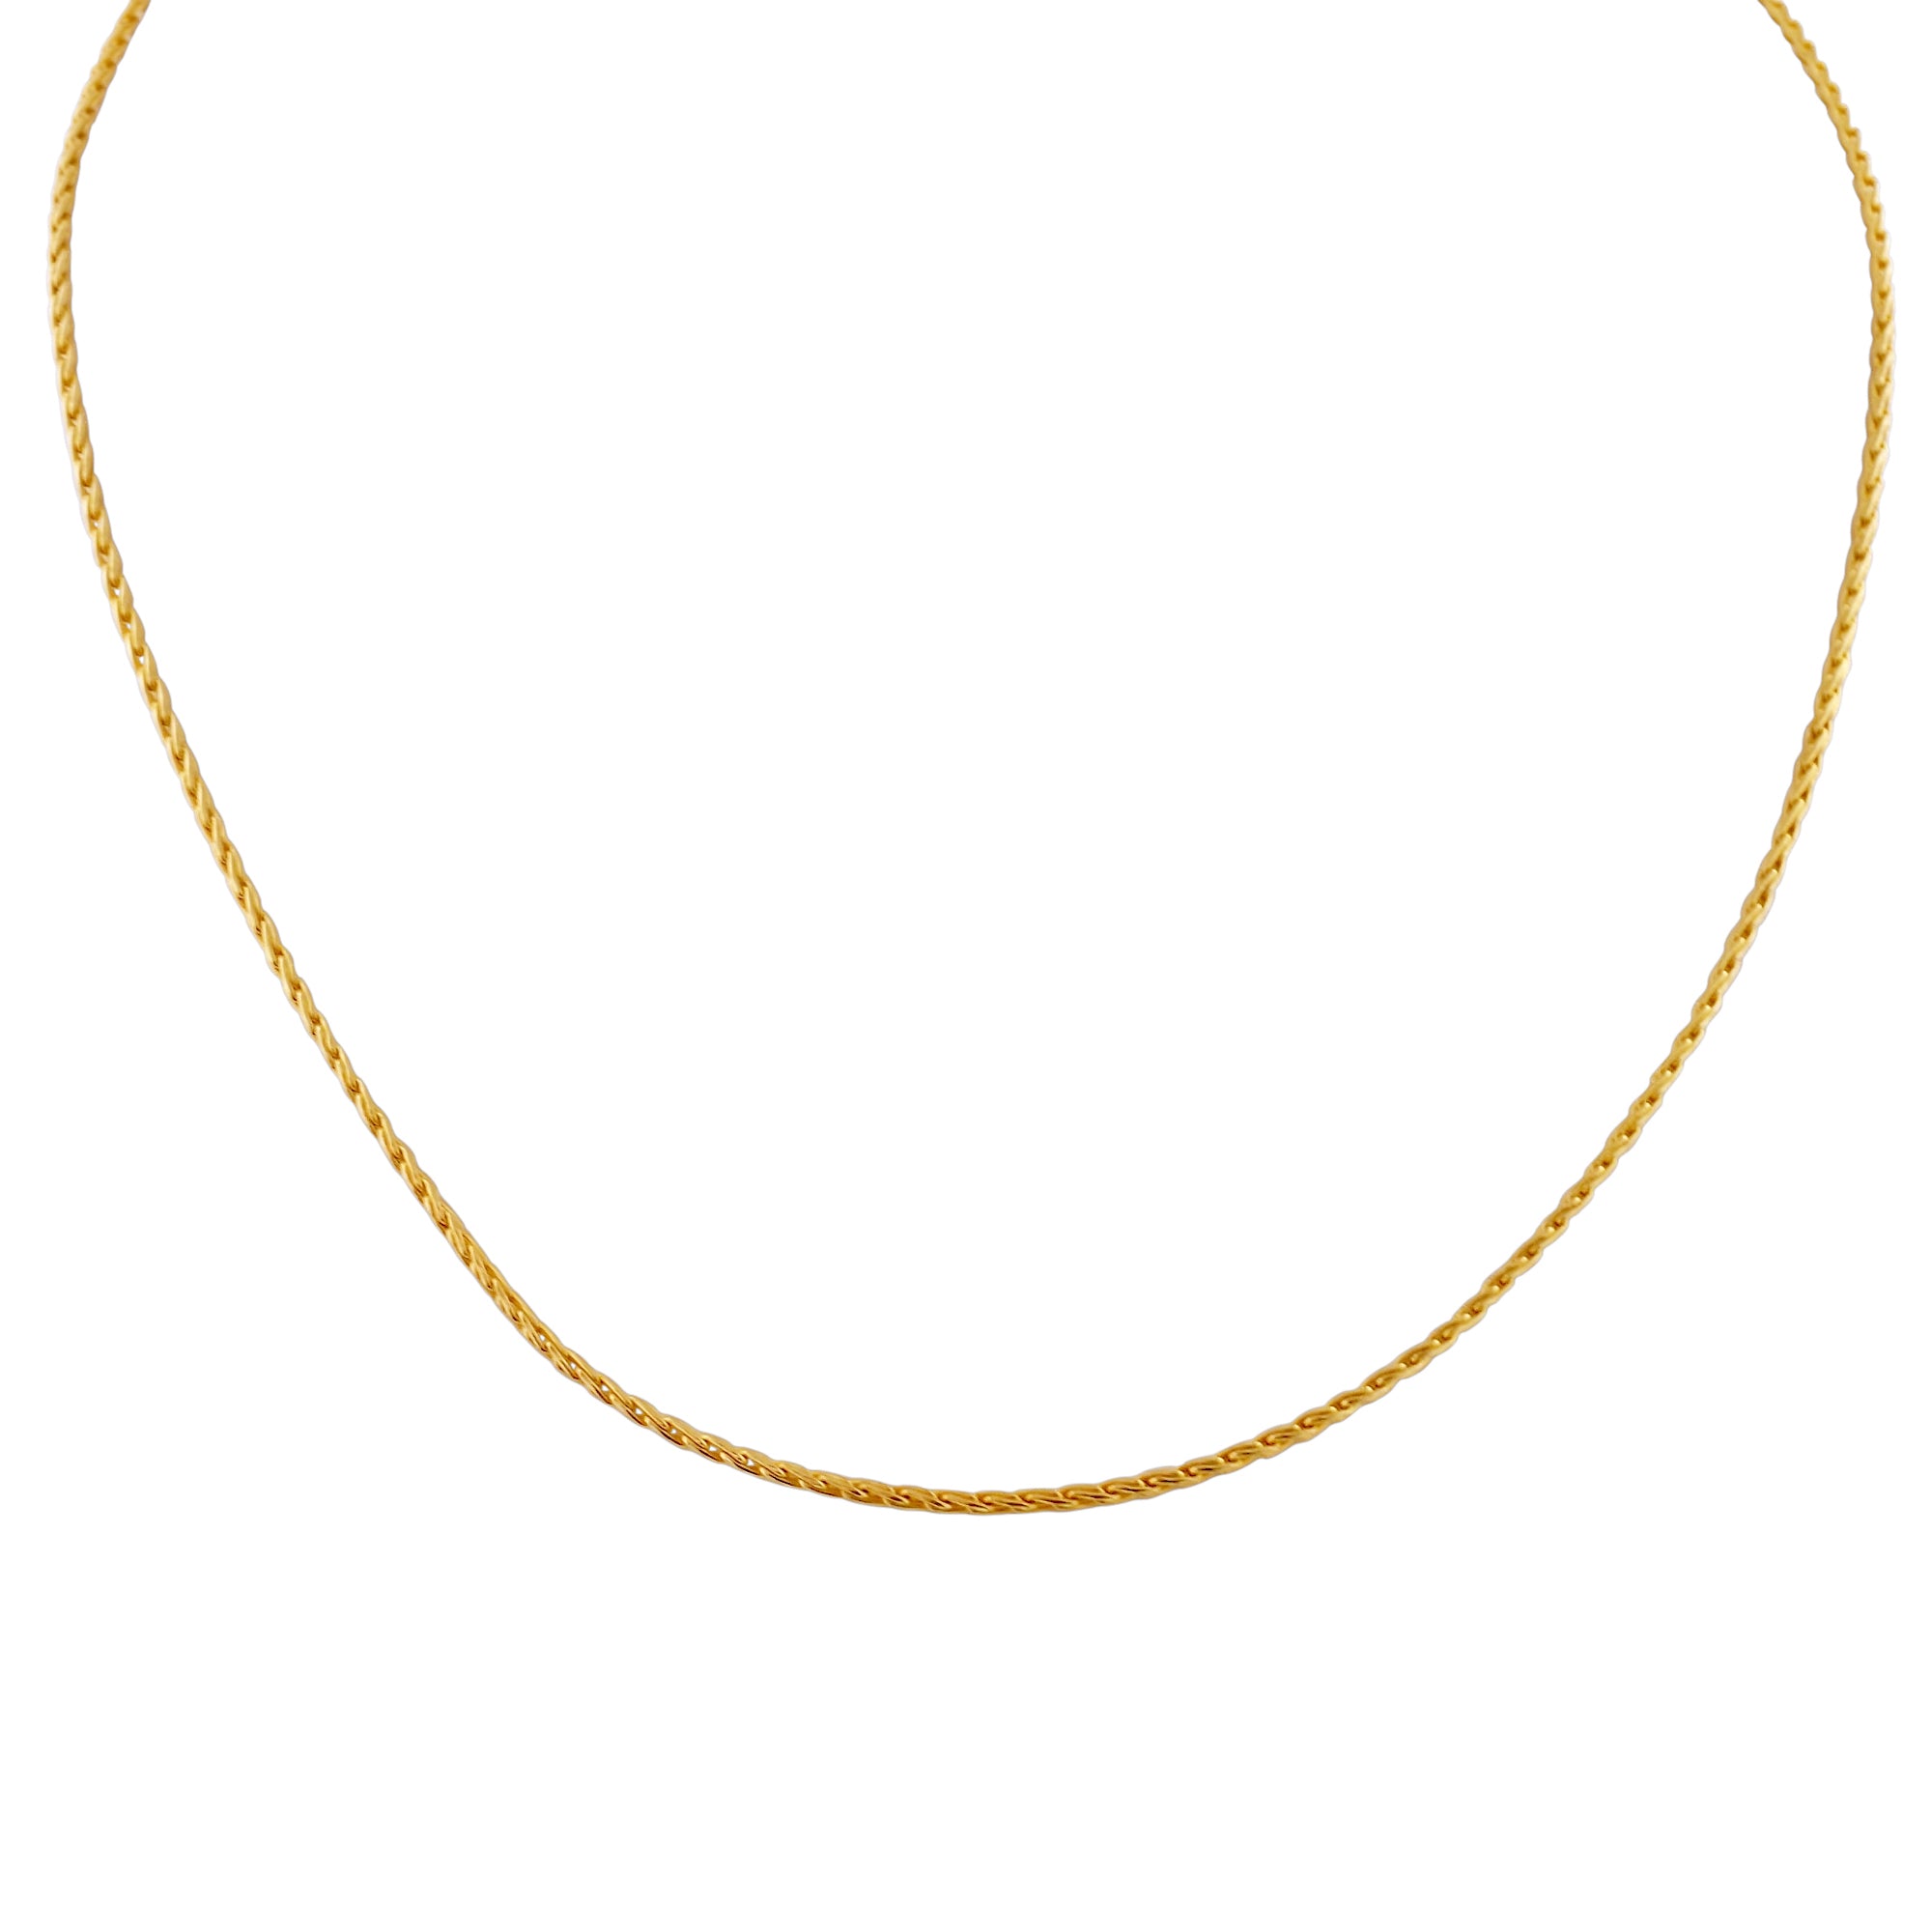 Parisian Wheat Chain in 14kt Yellow Gold (24 inches and 1.8mm wide)